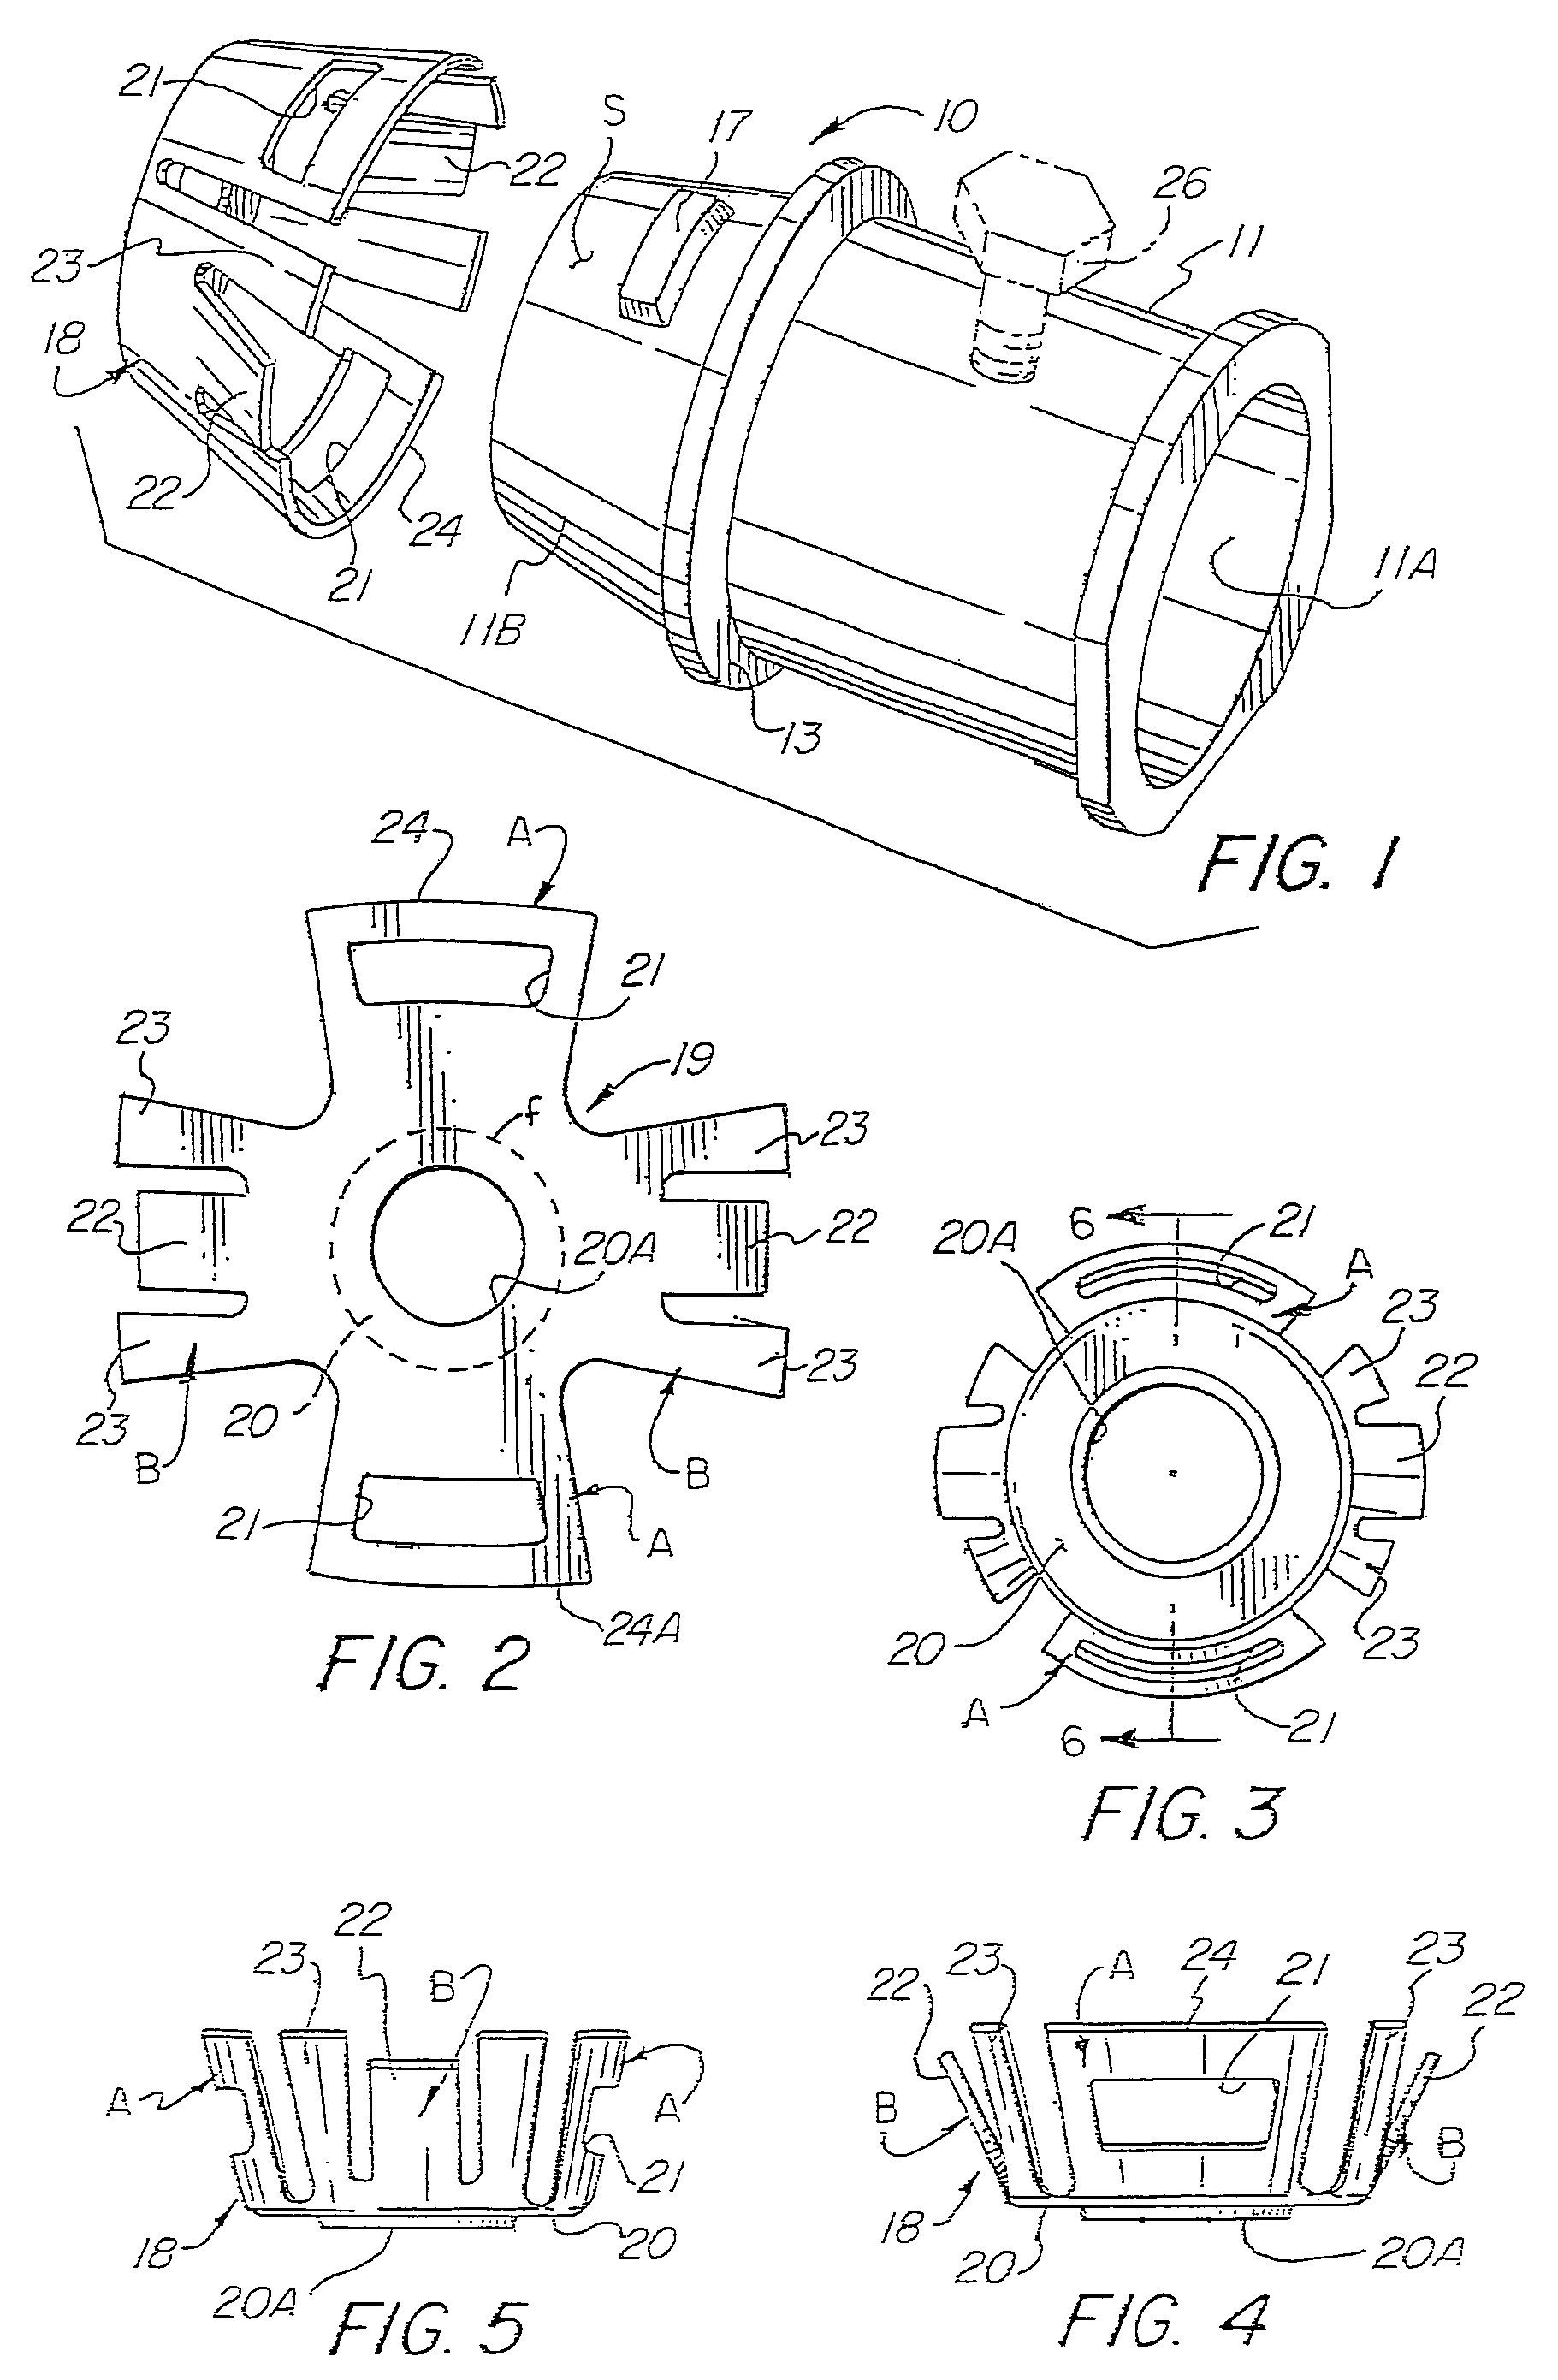 Electrical connector assembly with frusto-conical snap fit retaining ring for enhancing electrical grounding of the connector assembly to an electrical box and installation tool therefor